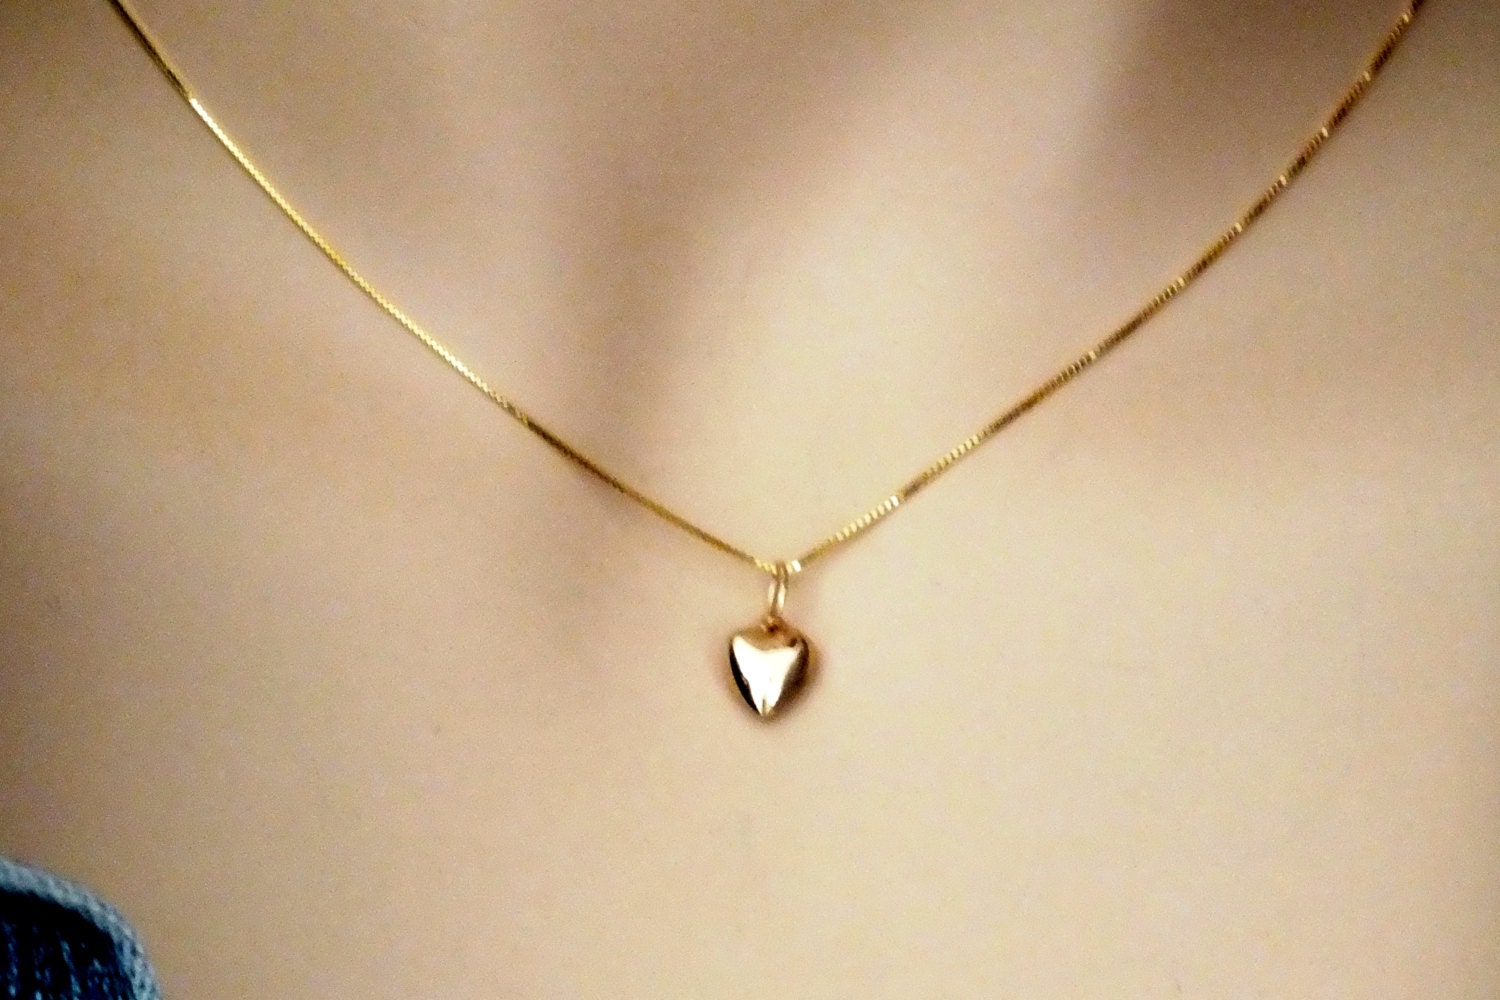 Solid 14K Gold Tiny Heart Necklace Add Small Initial Charms 1 Charm 18in Necklace